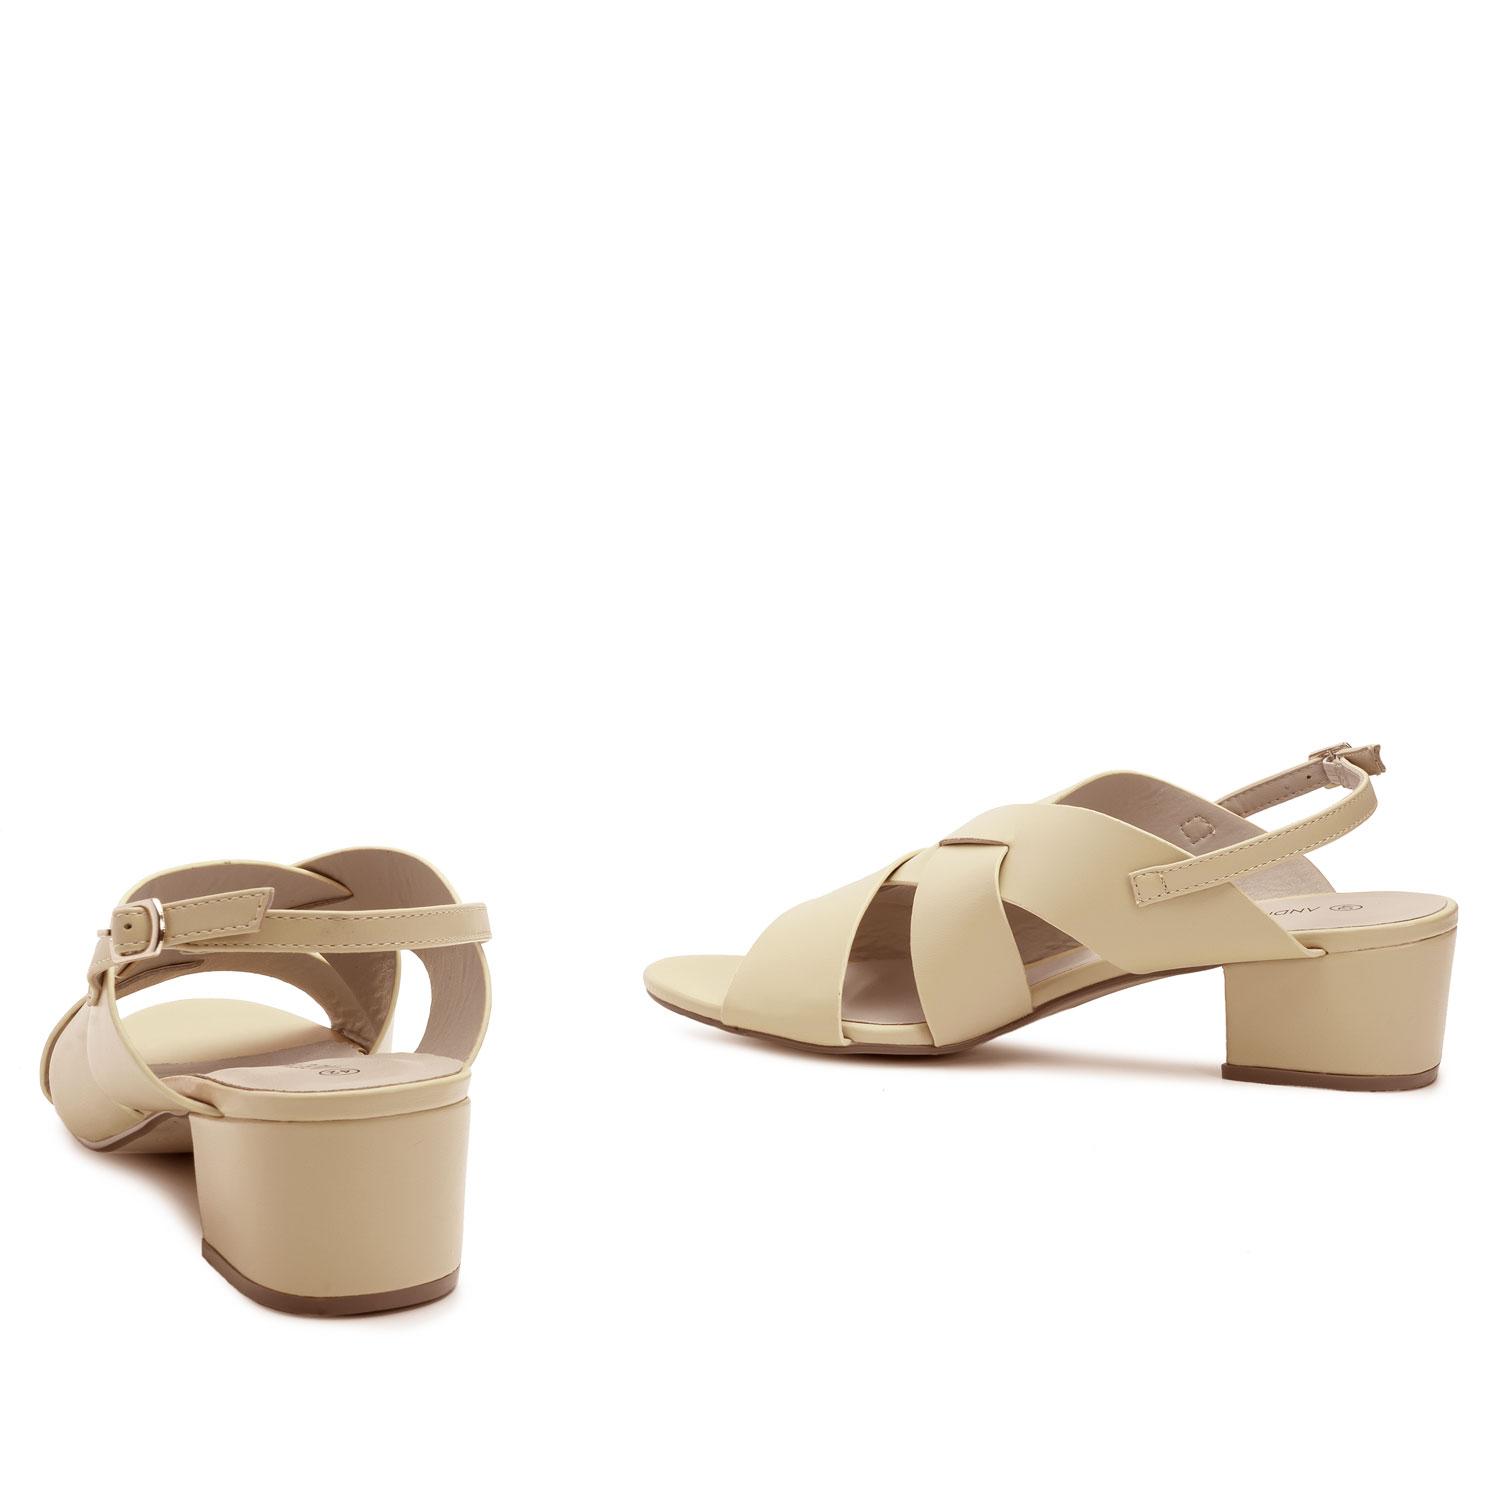 Cream Colored Faux Leather Sandals 